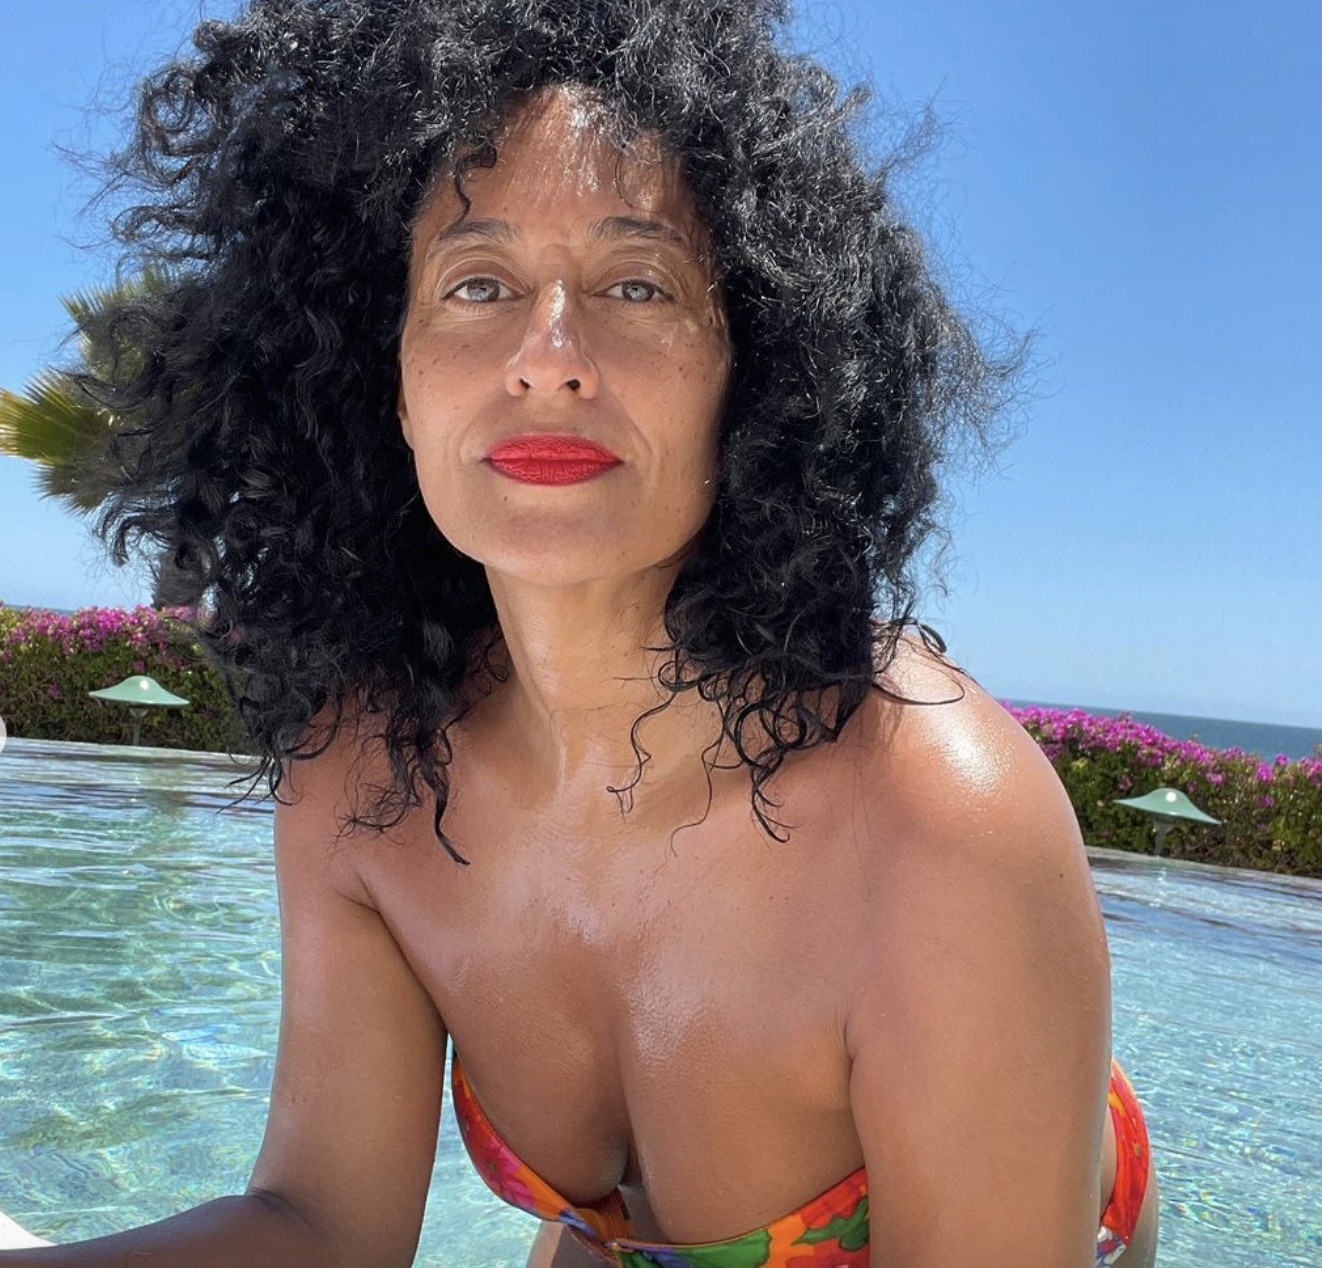 doug sholes recommends tracee ellis ross topless pic